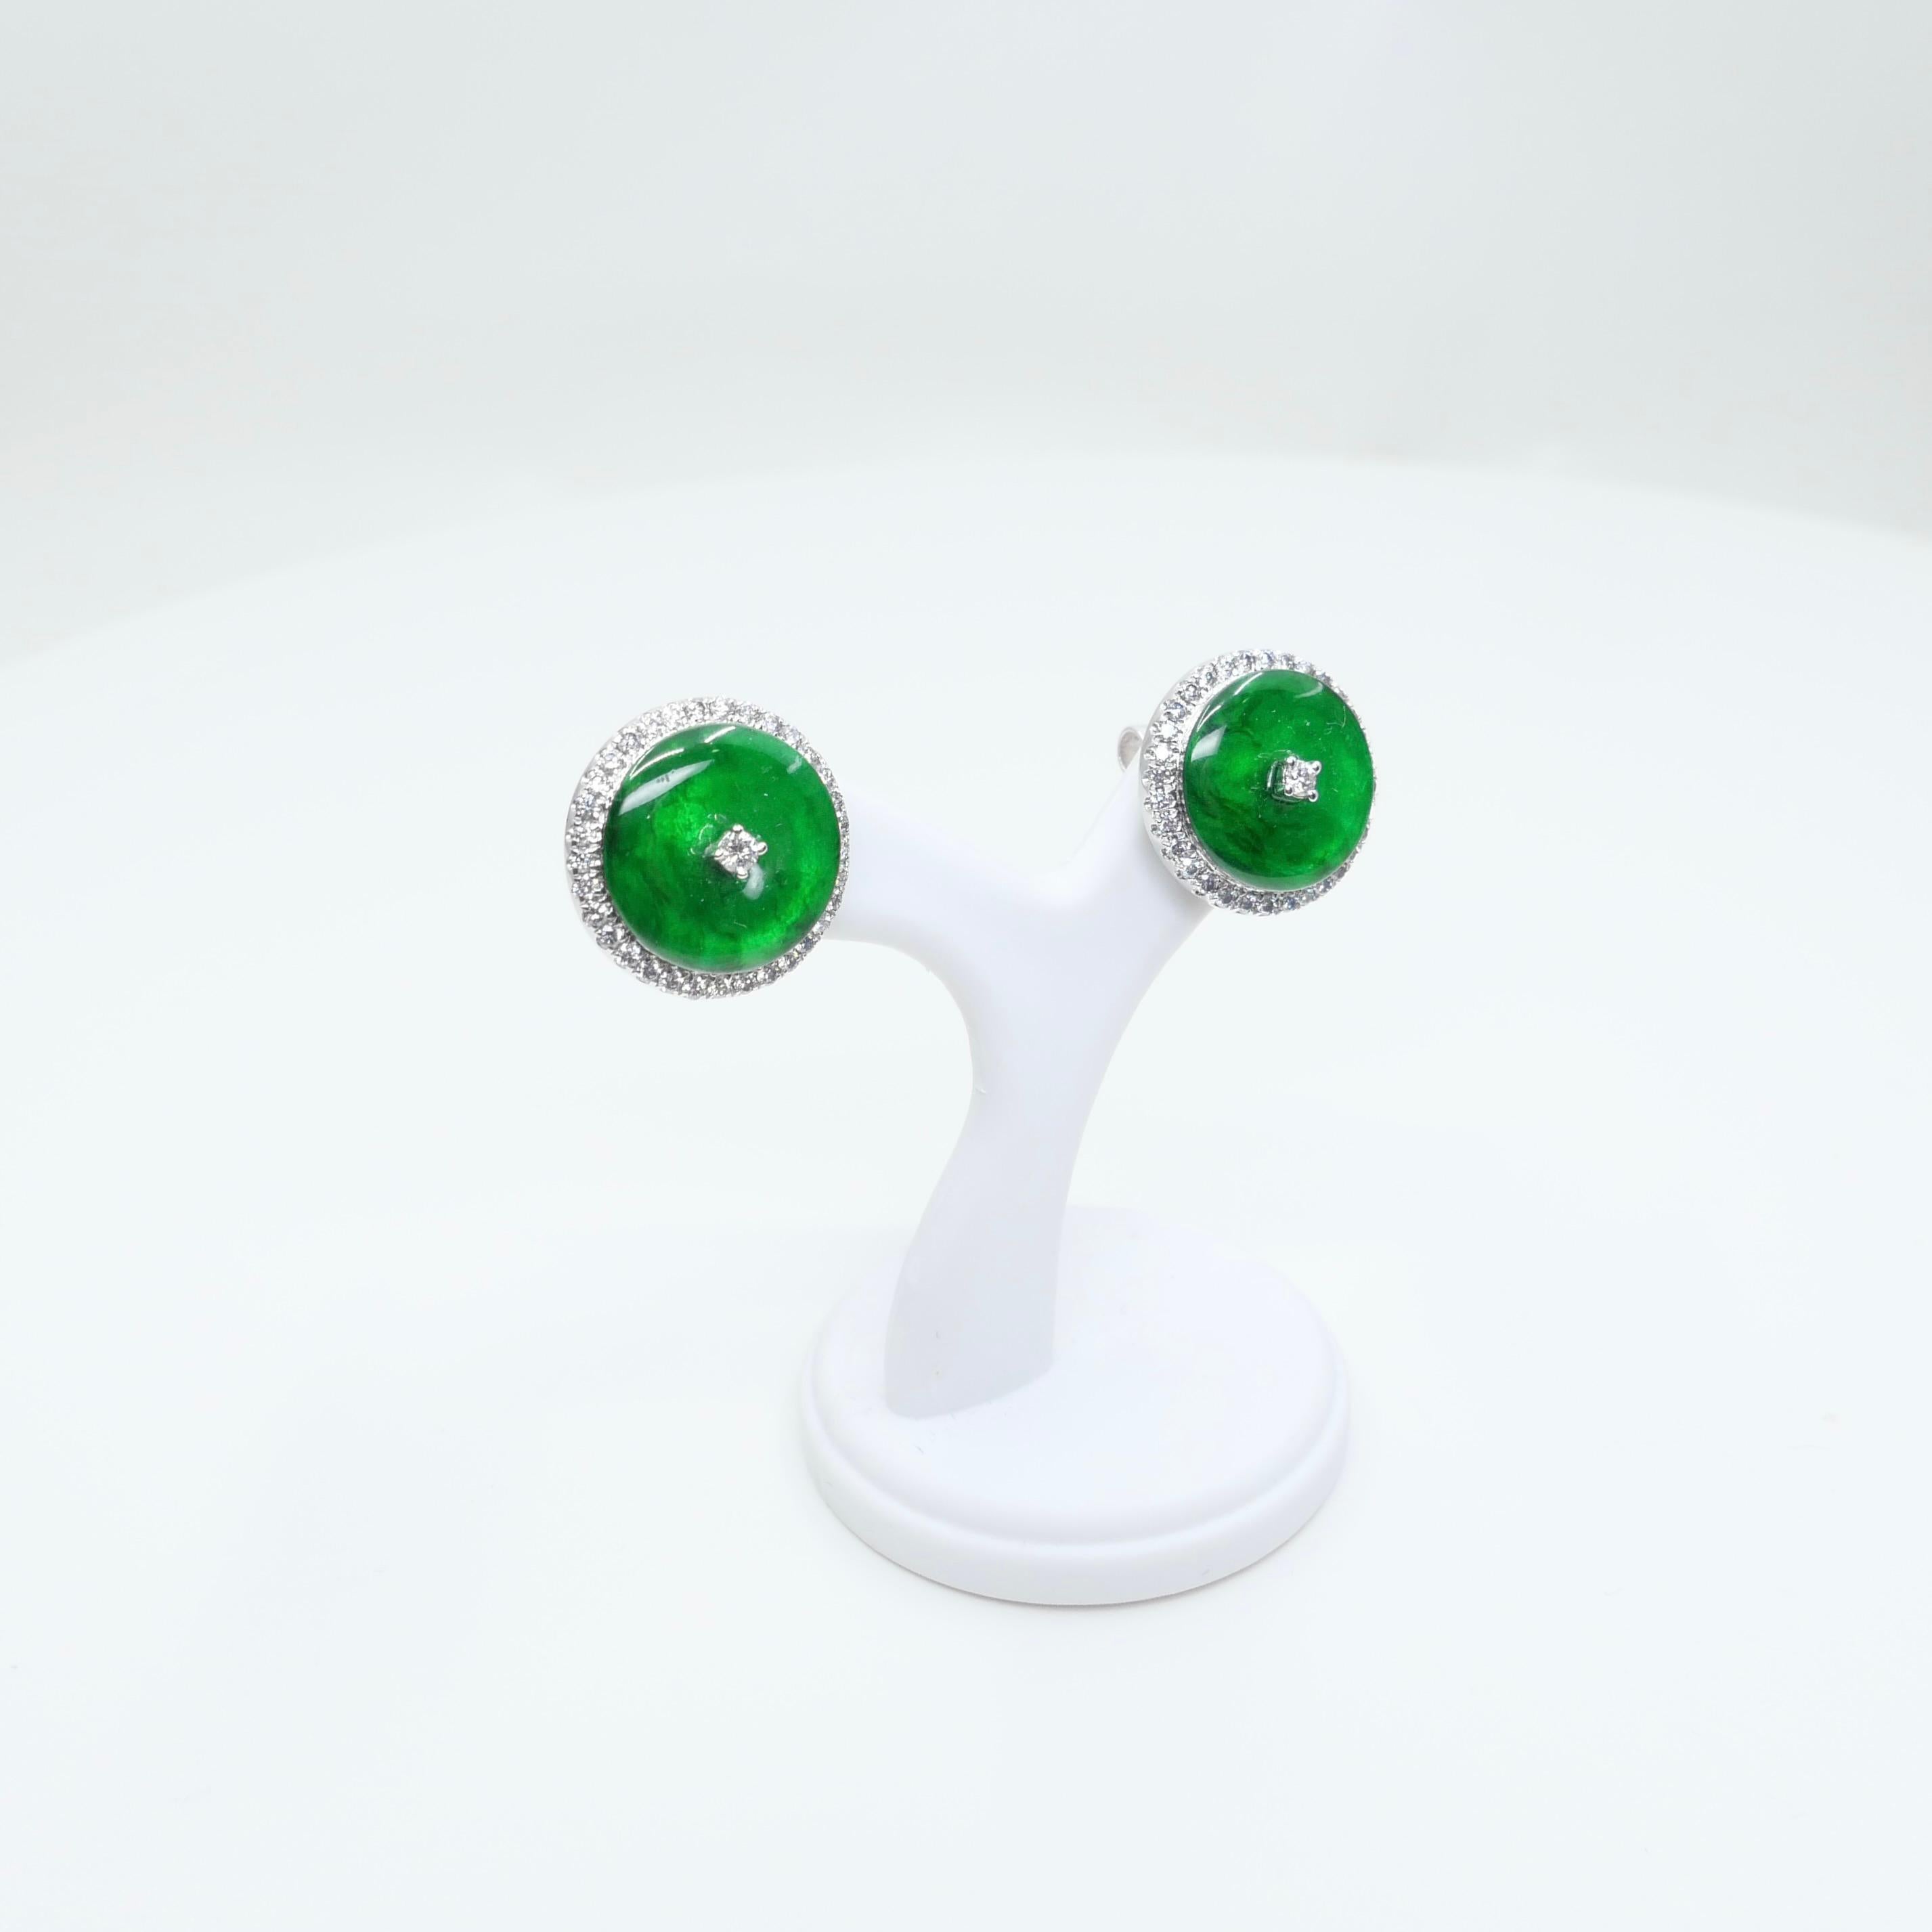 Certified Natural Type A Jadeite Jade And Diamond Earrings. Apple Green Color 11